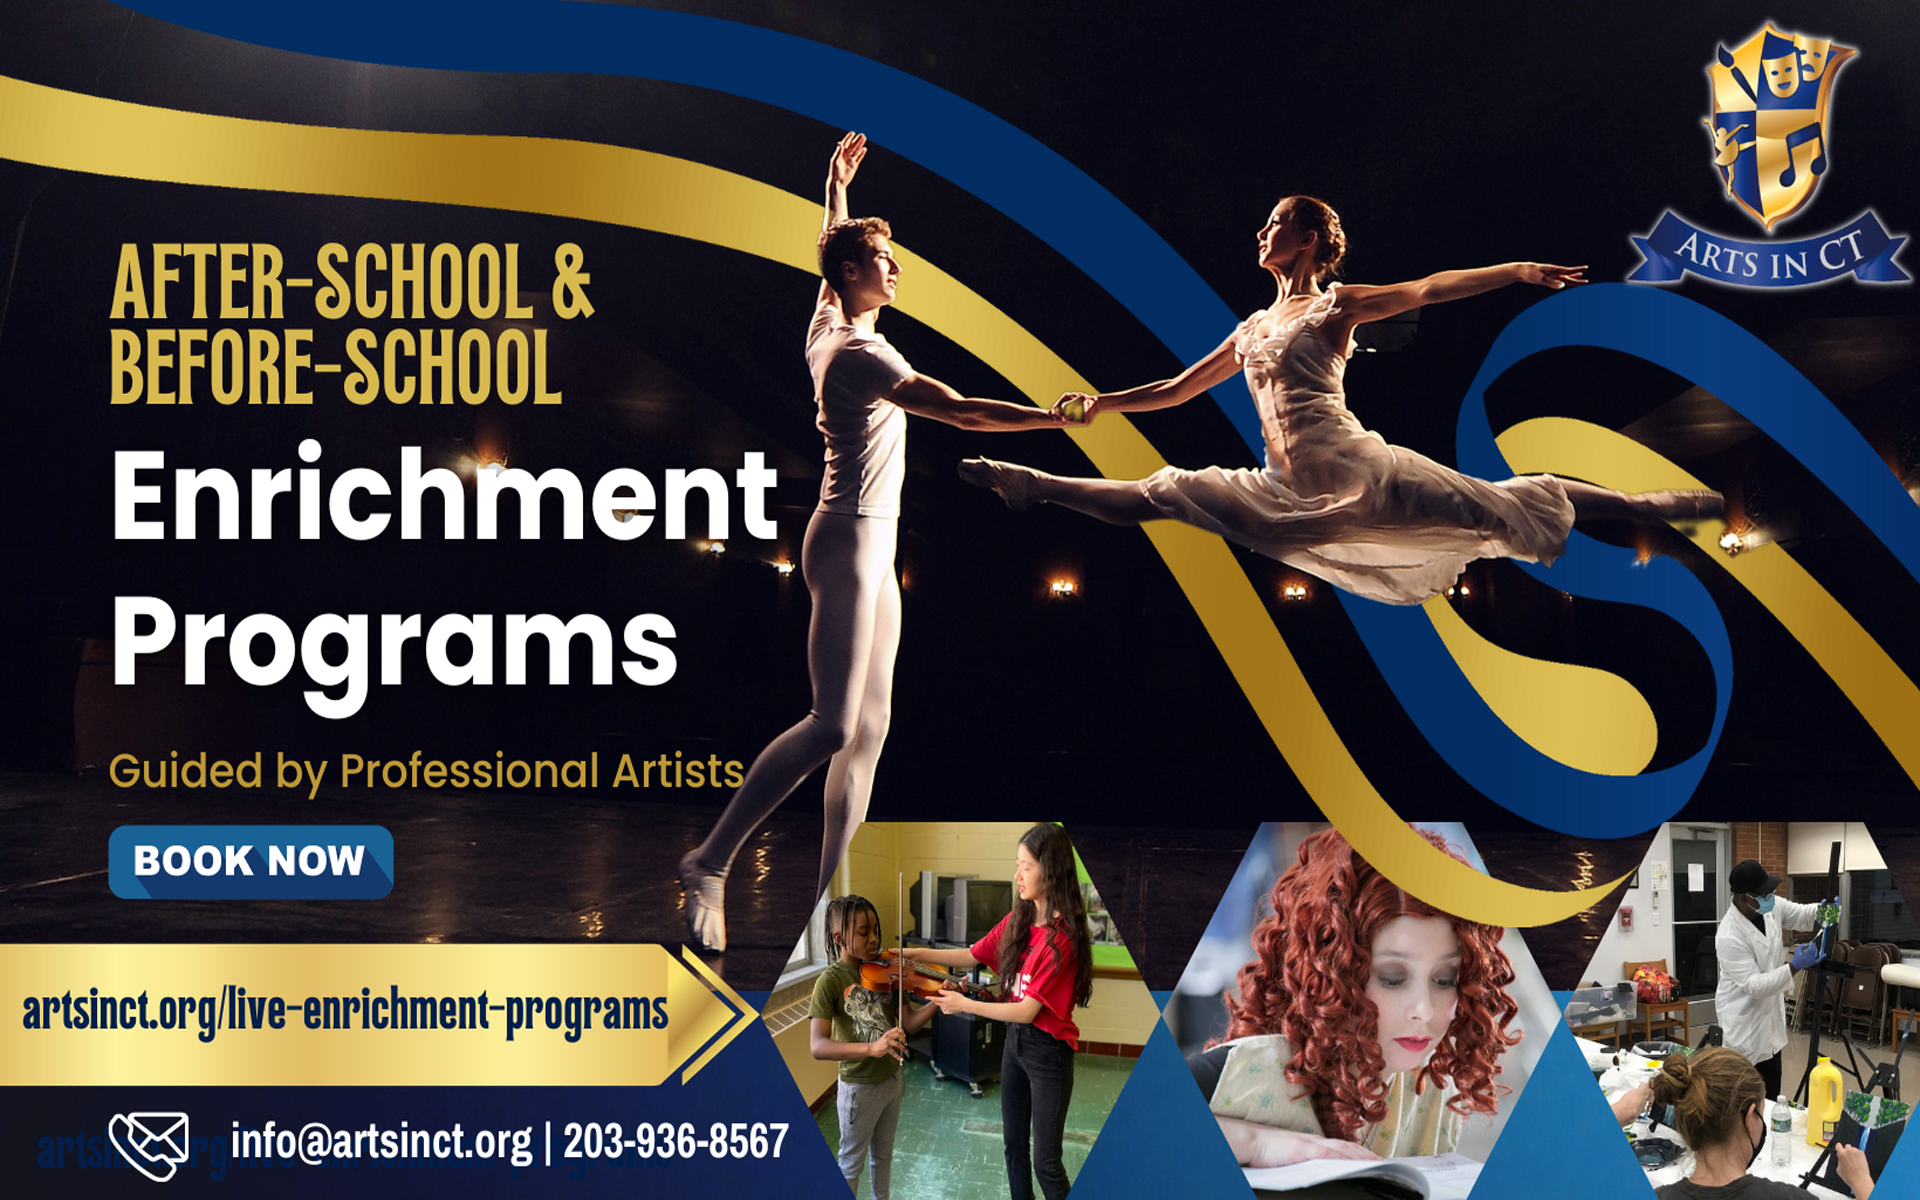 After-school and Before-School Enrichment Programs